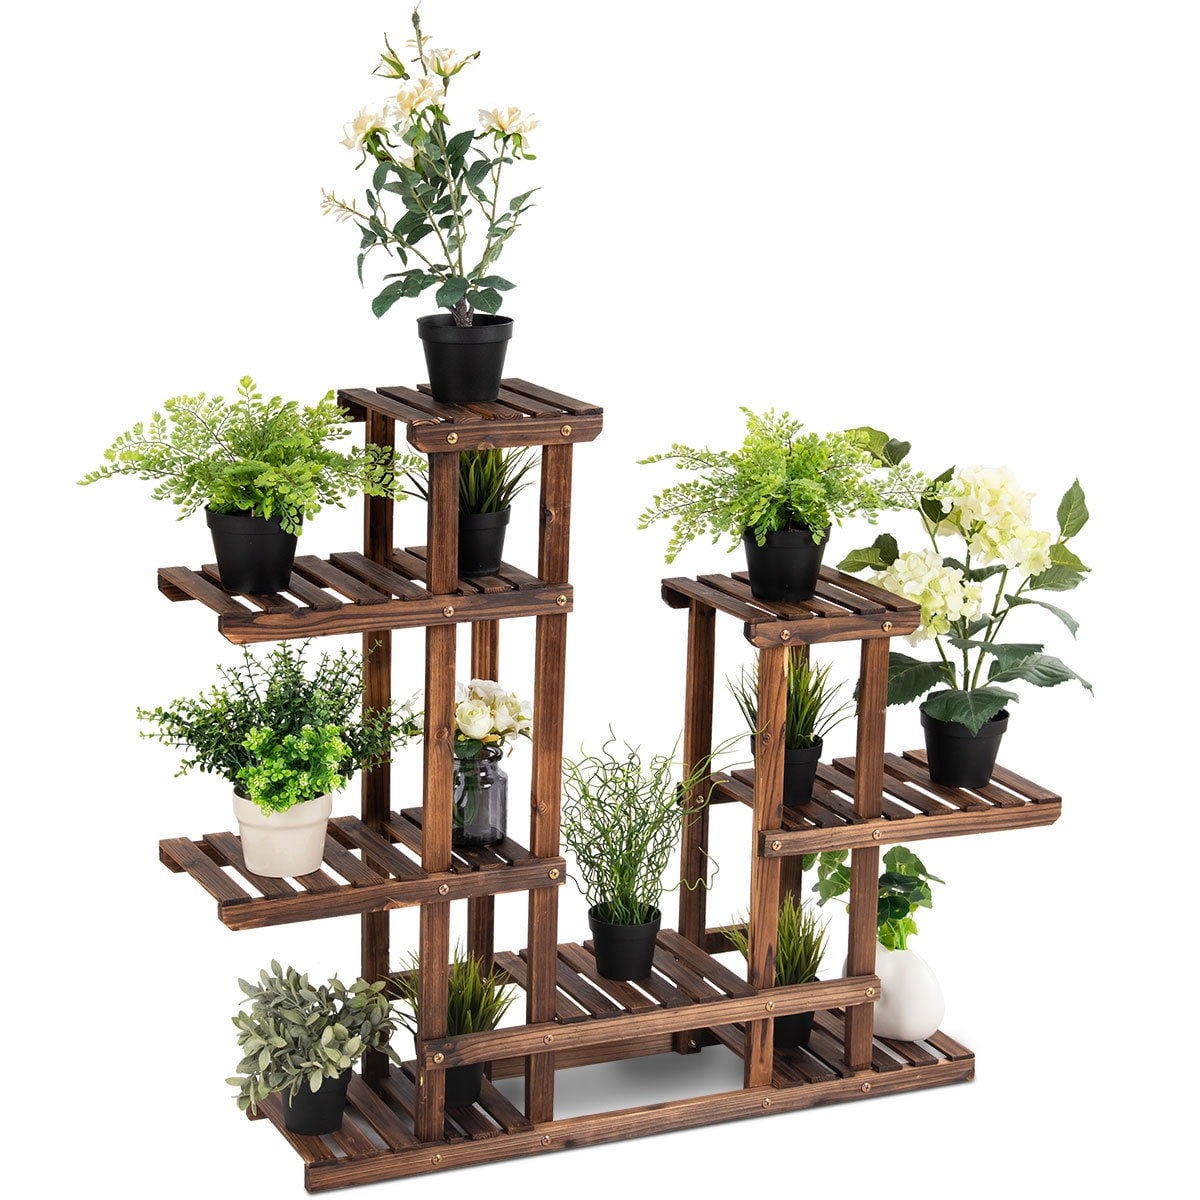 13-incredible-unho-wooden-plant-flower-display-stand-wood-pot-shelf-storage-rack-for-2023